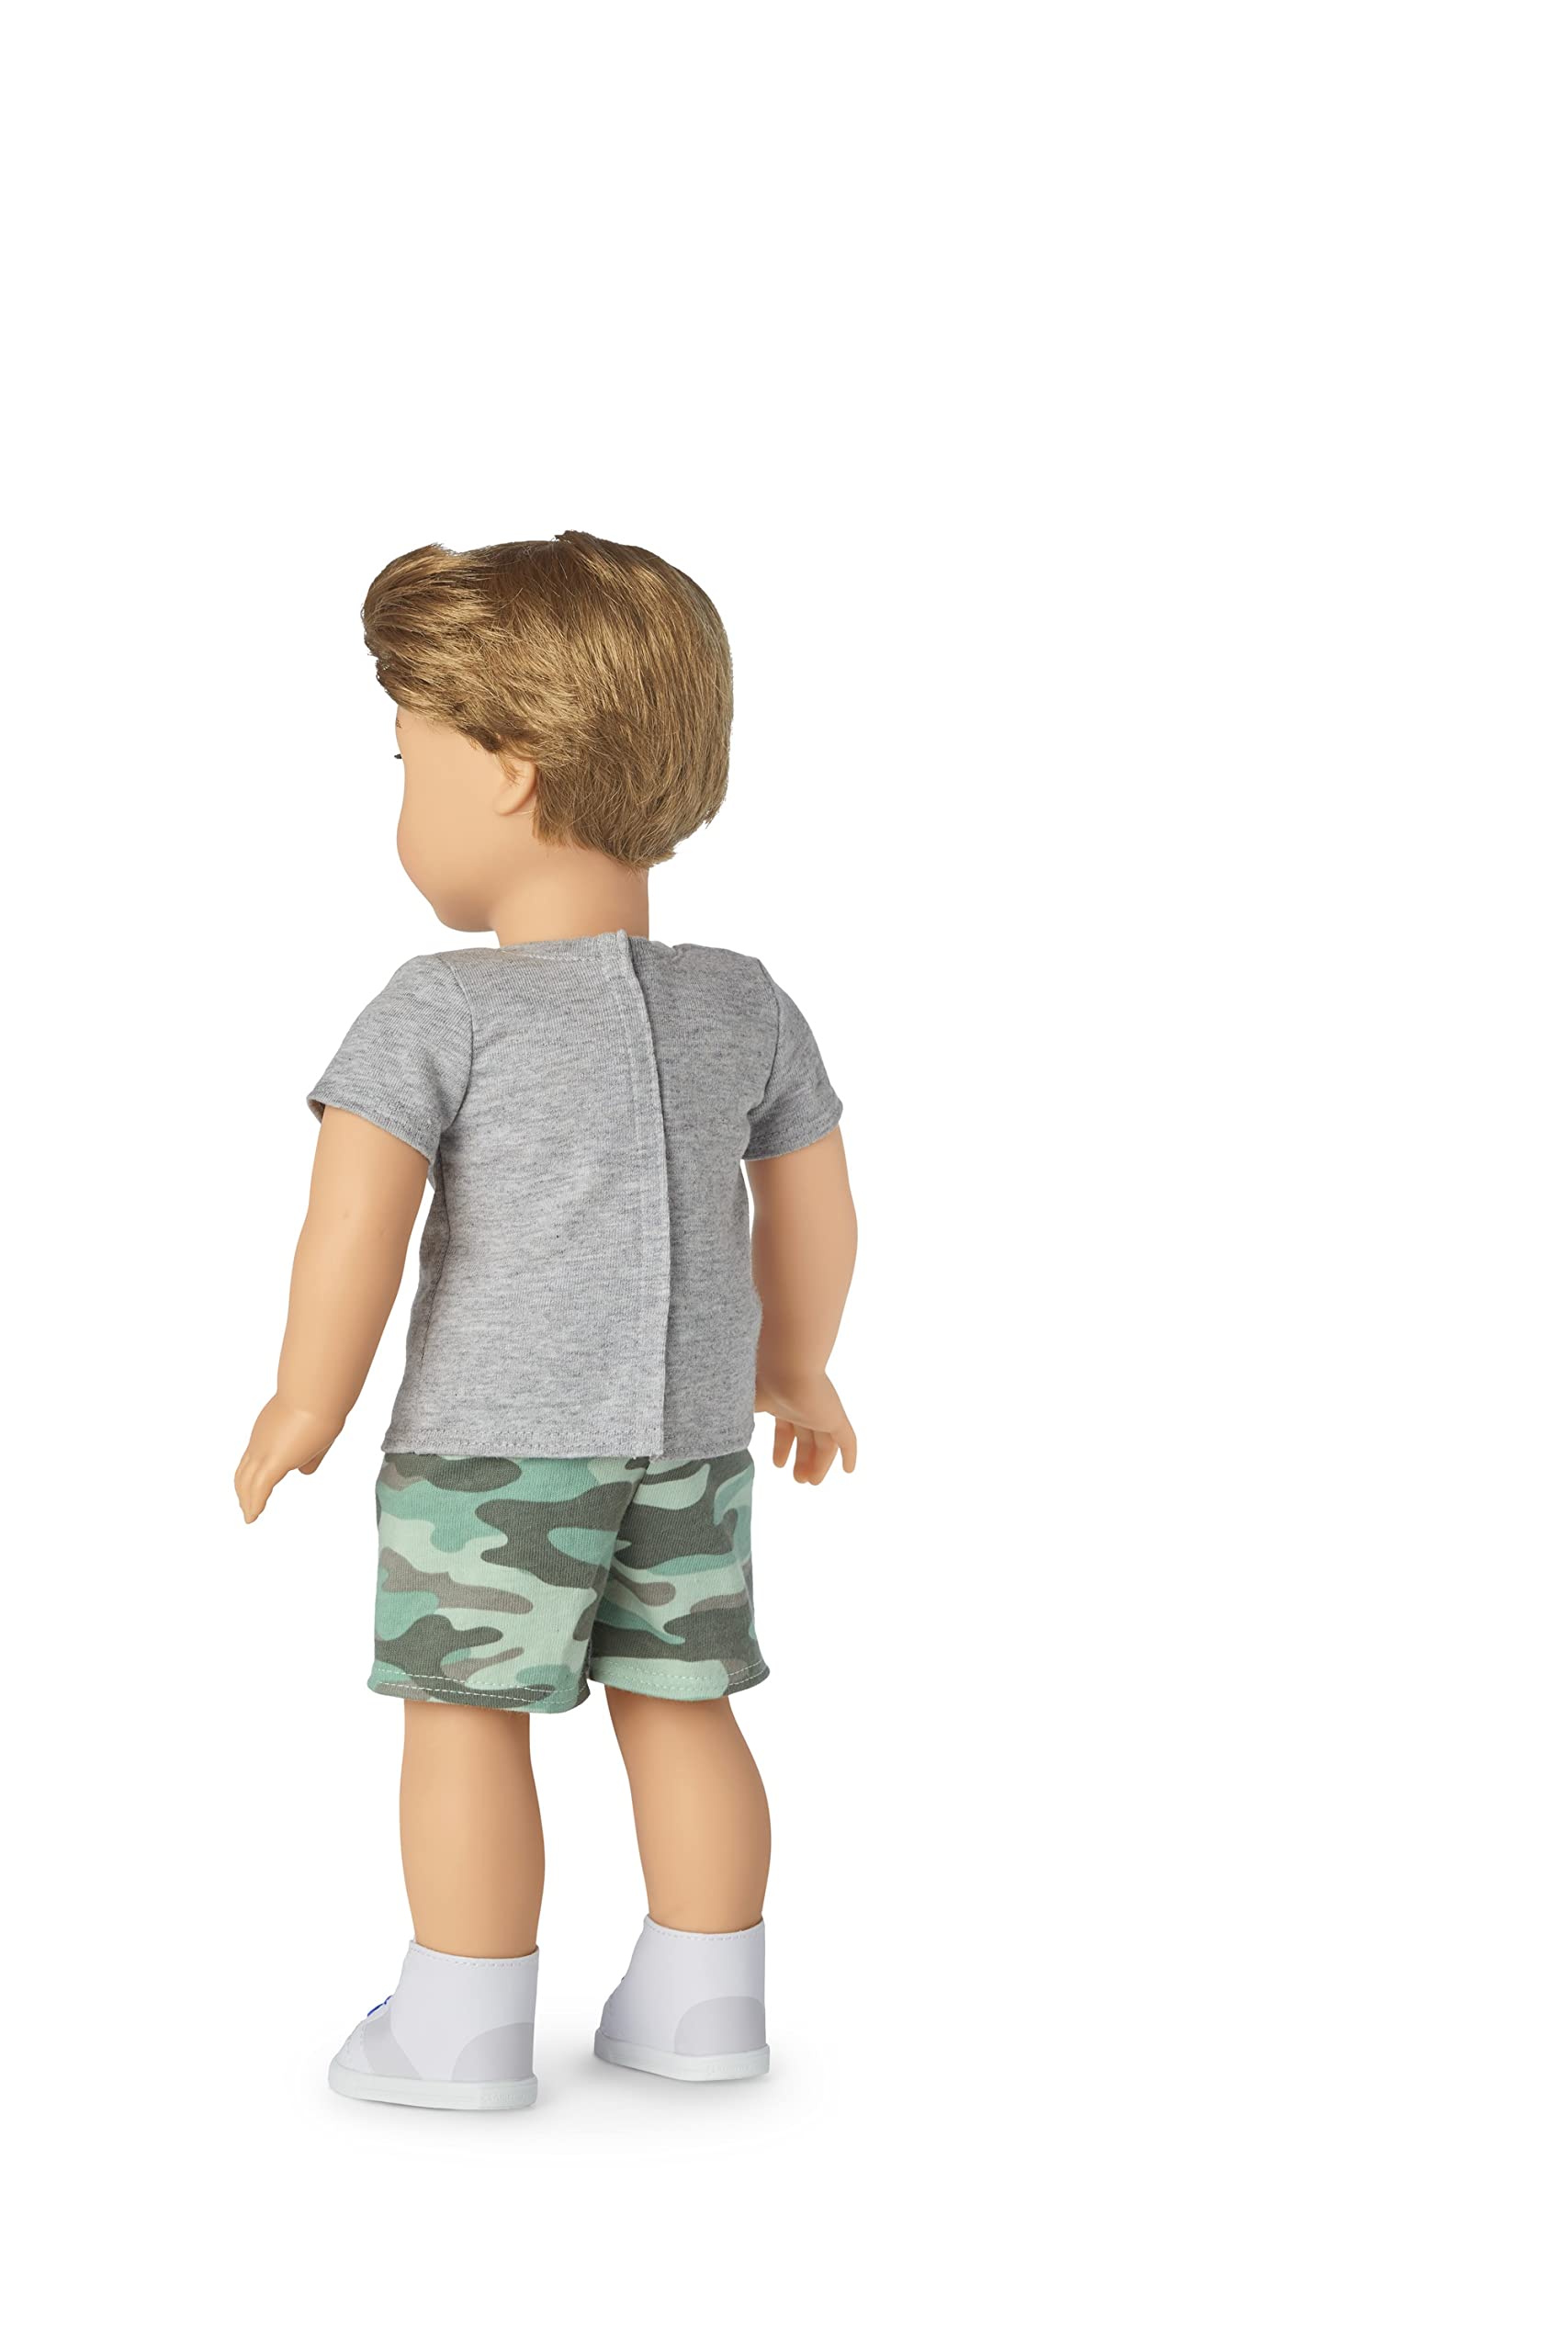 American Girl Truly Me 18-Inch Doll 104 with Dark-Blue Eyes, Straight Caramel Hair, Light Skin with Warm Olive Undertones, Camo Shorts and Grey T-Shirt